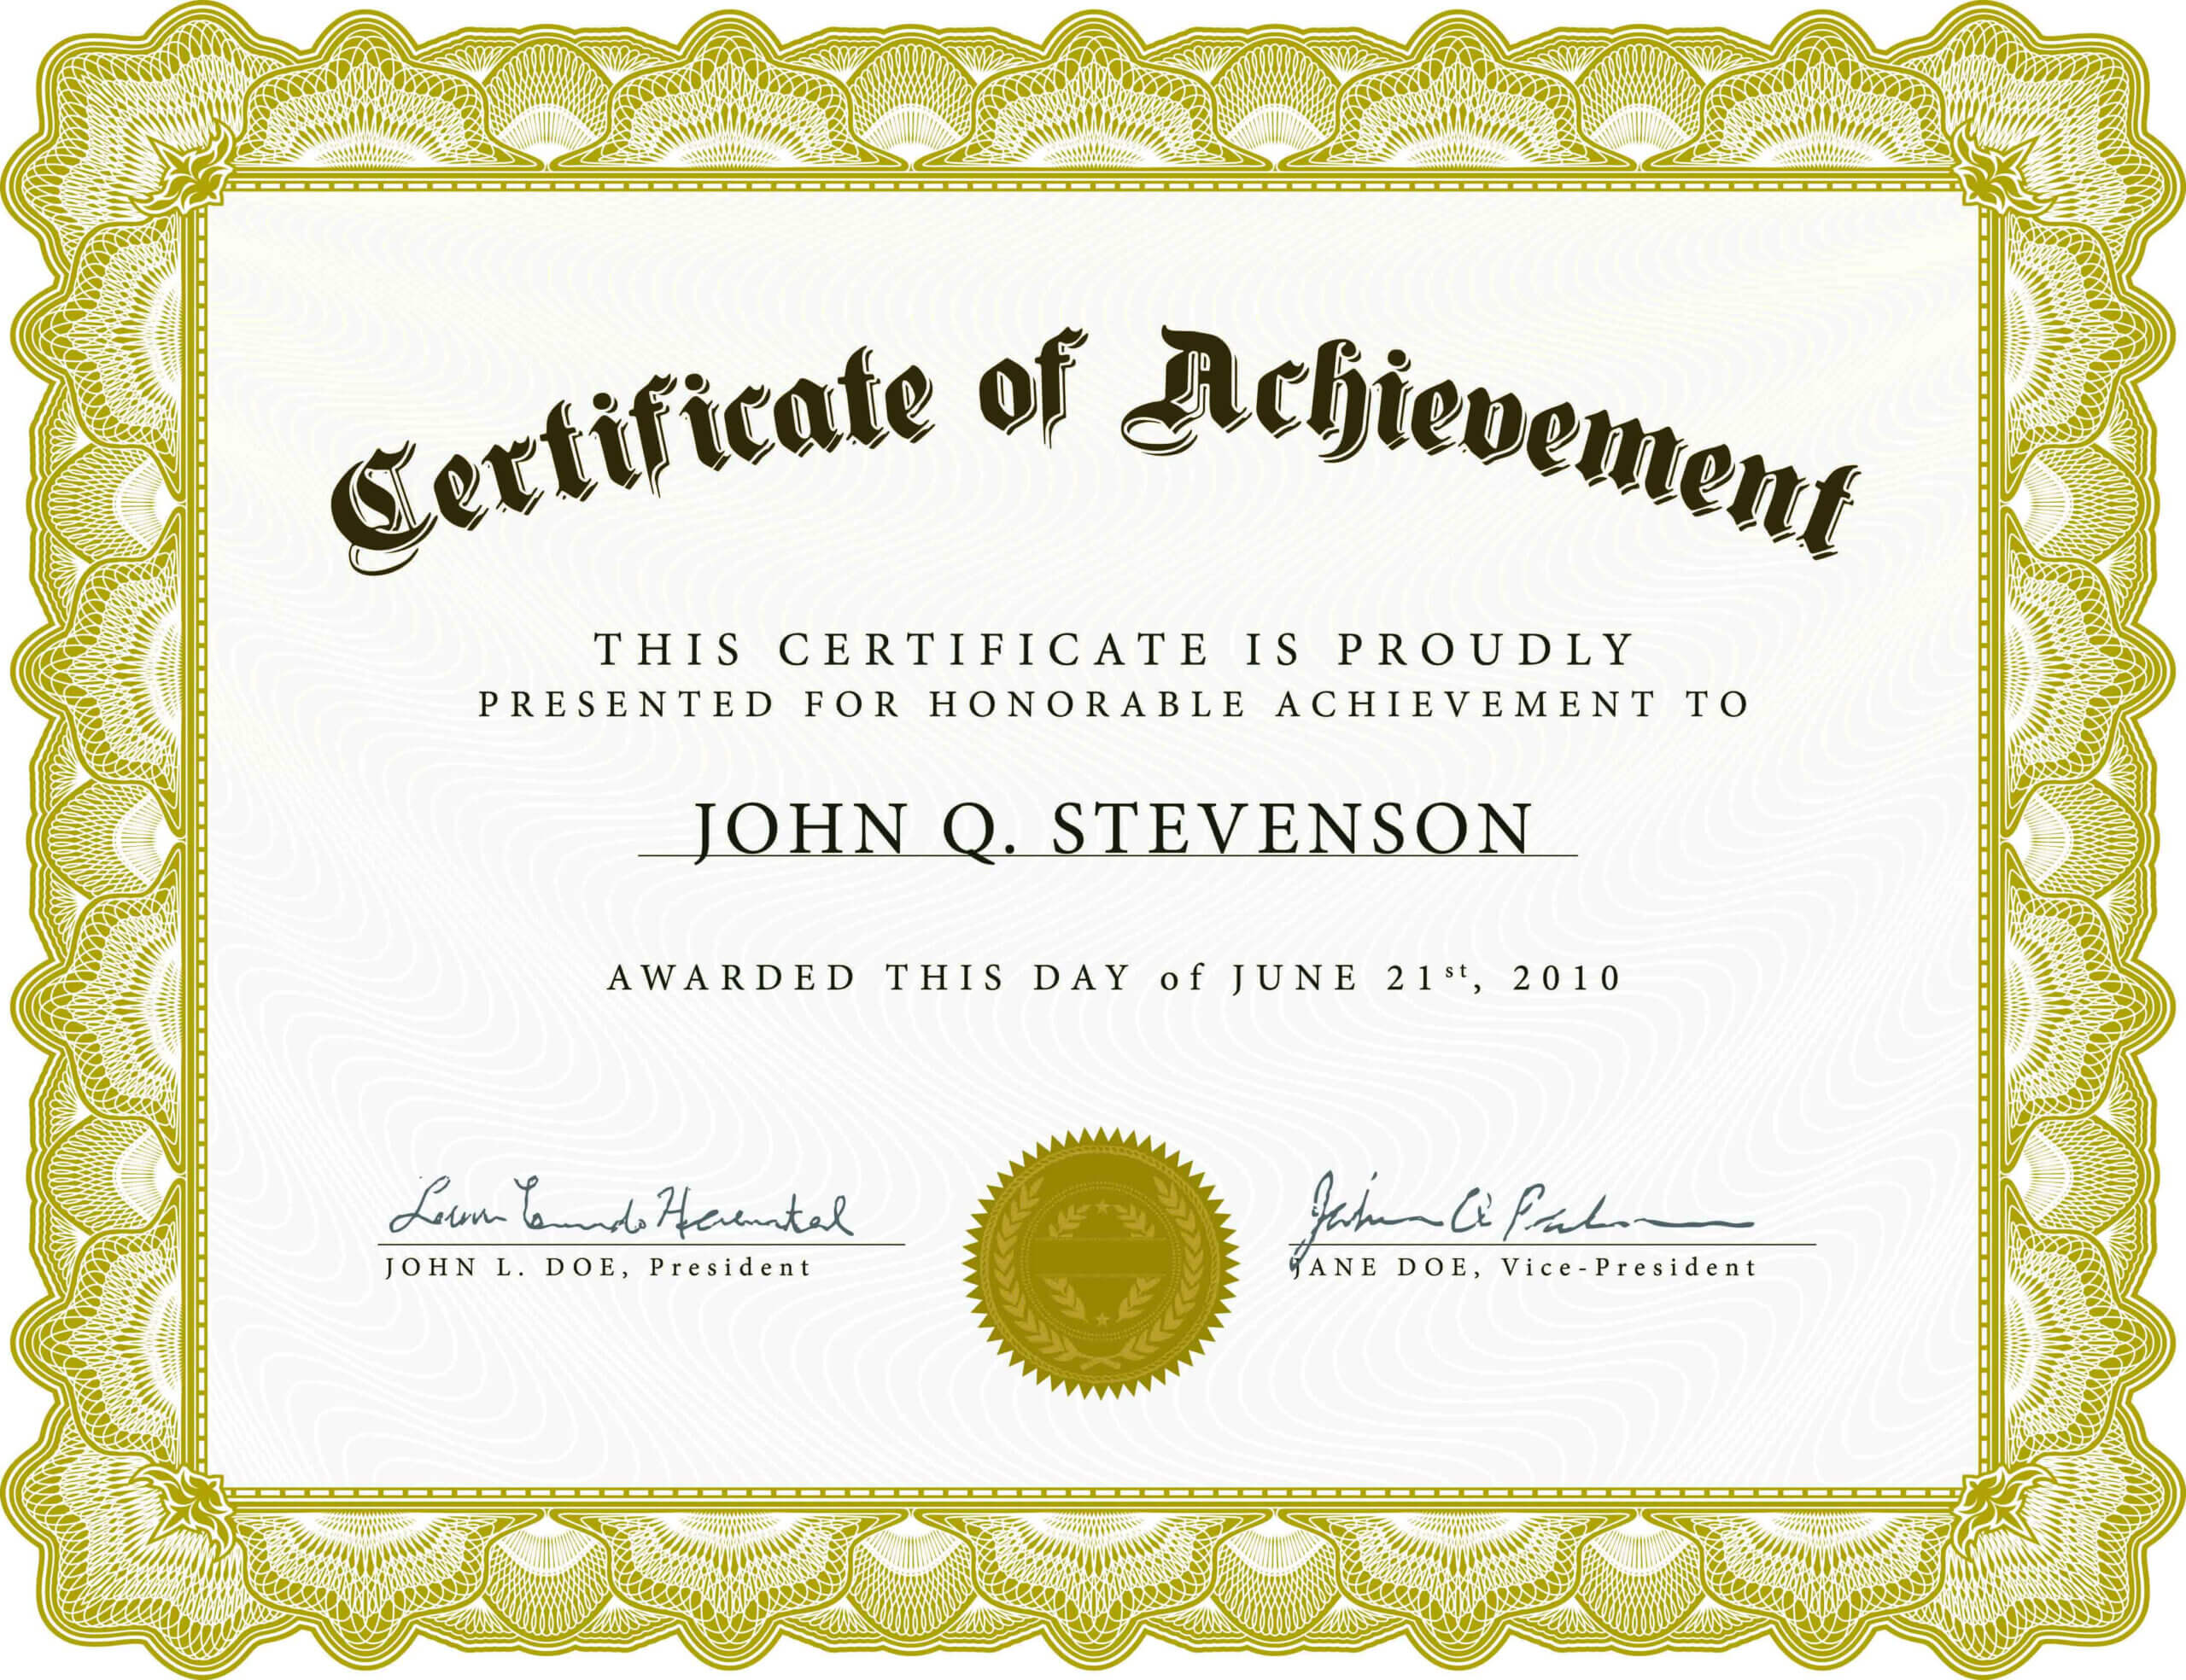 Certificate Of Academic Achievement Template | Photo Stock Within Free Stock Certificate Template Download